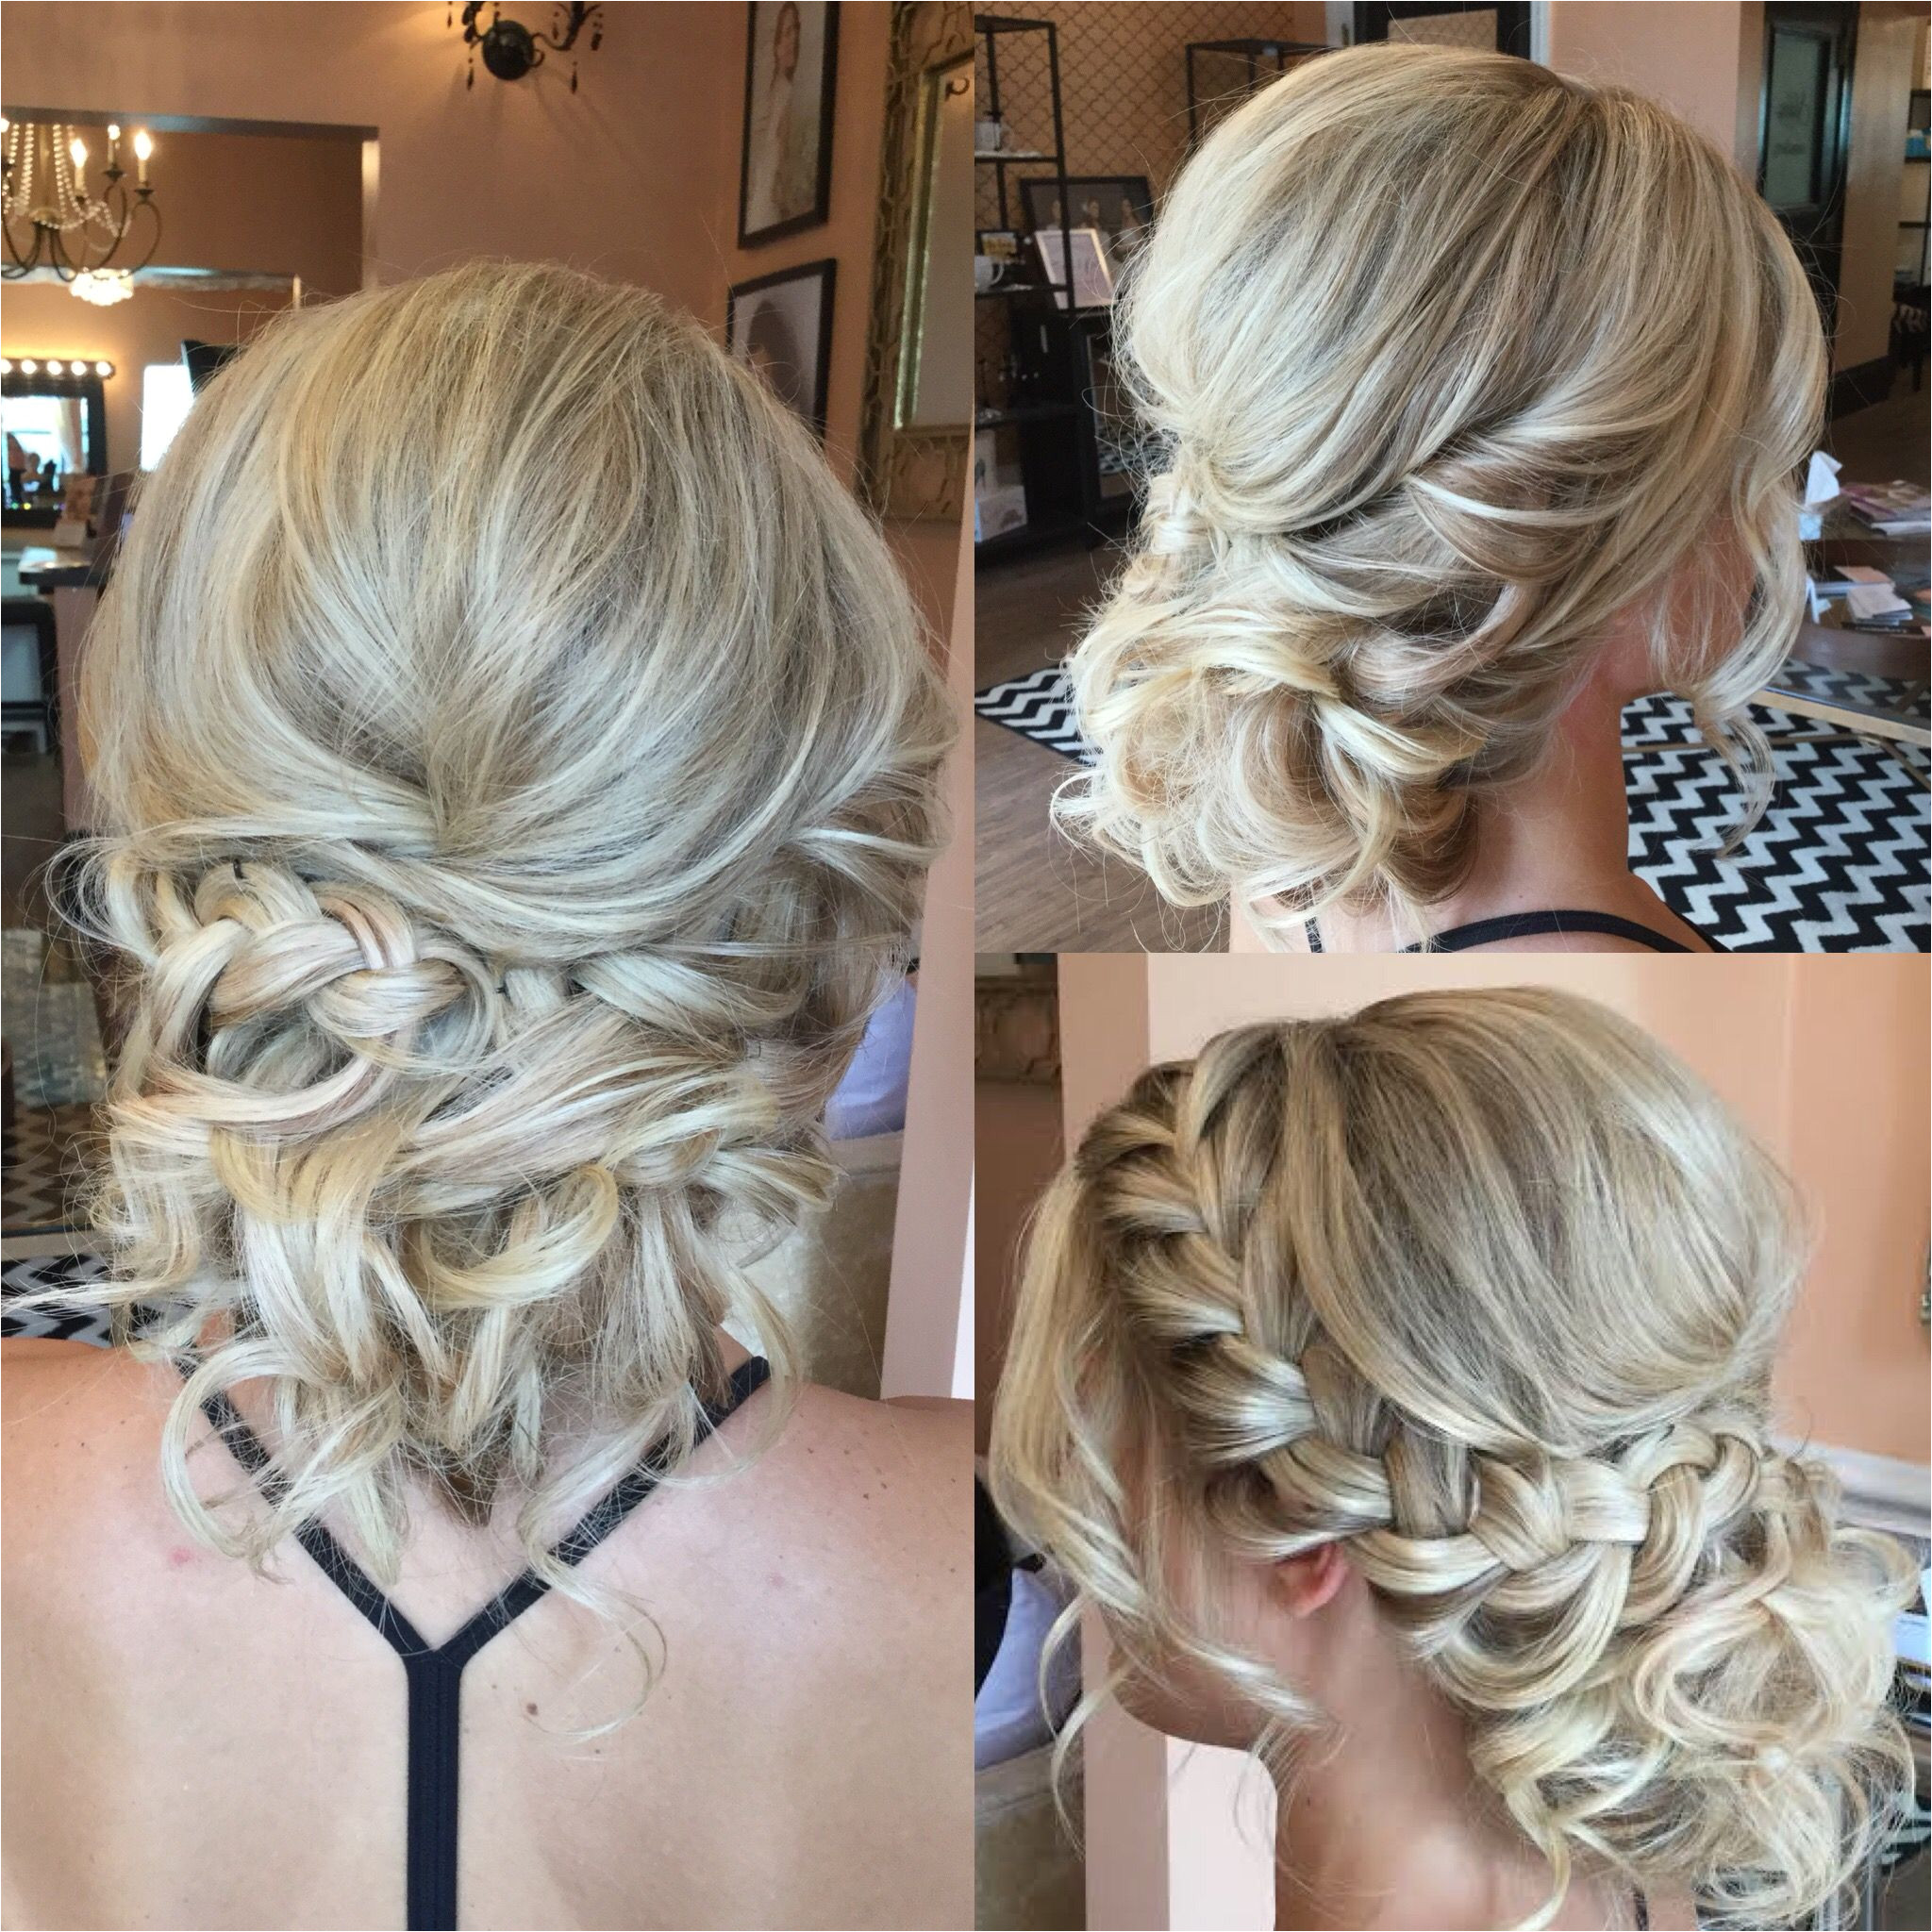 Textured up do for blondes with curls and side braid Bridal & formal hairstyle